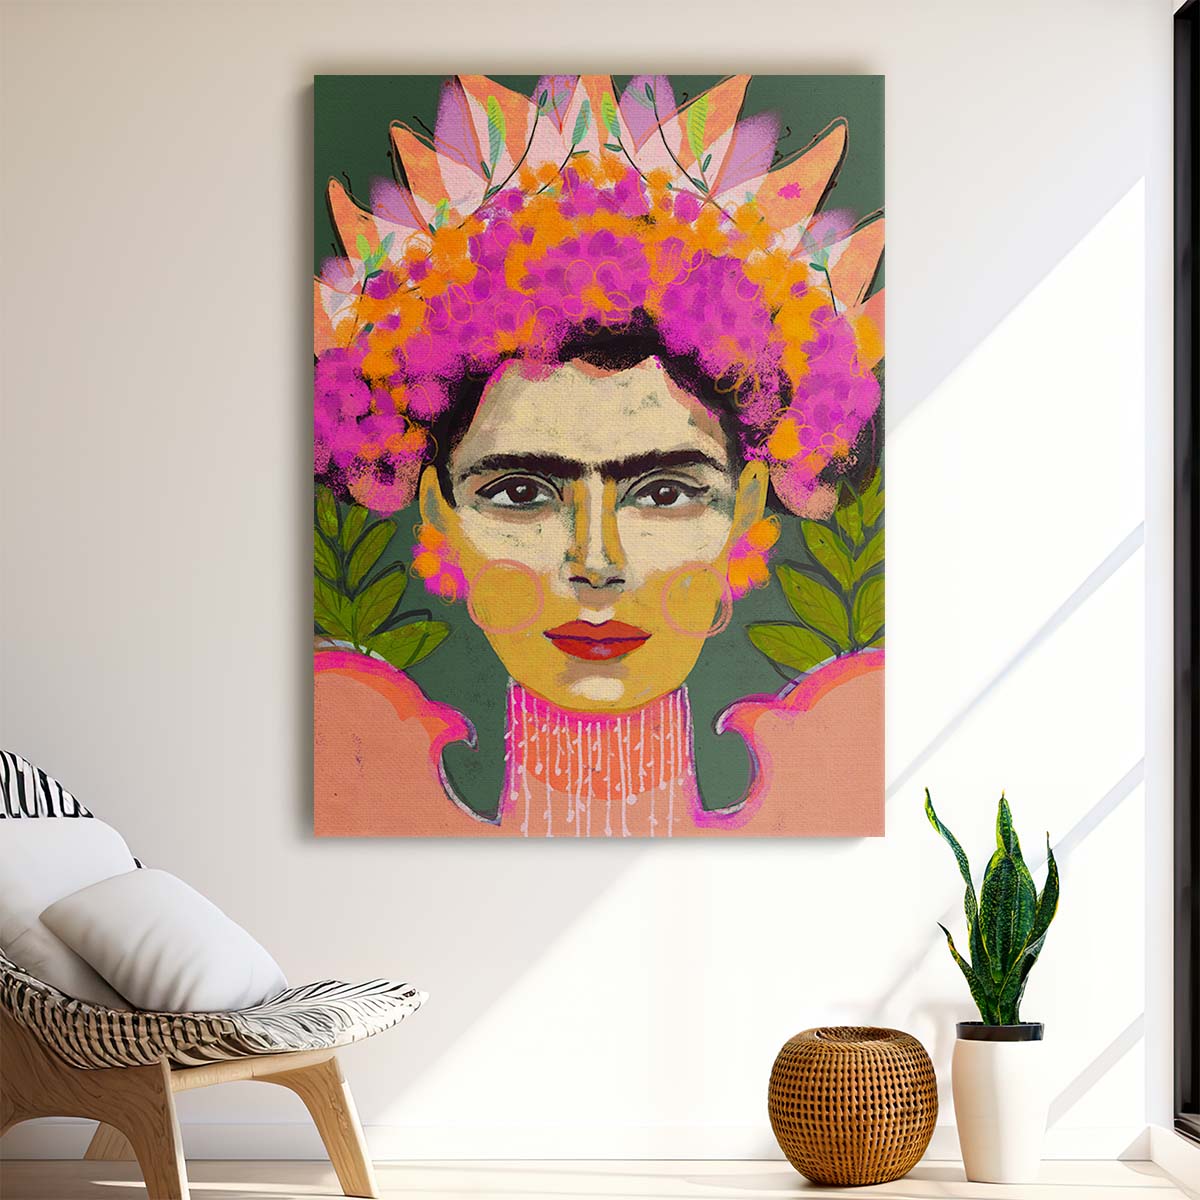 Frida Kahlo Colorful Portrait Illustration with Floral Wreath by Treechild by Luxuriance Designs, made in USA